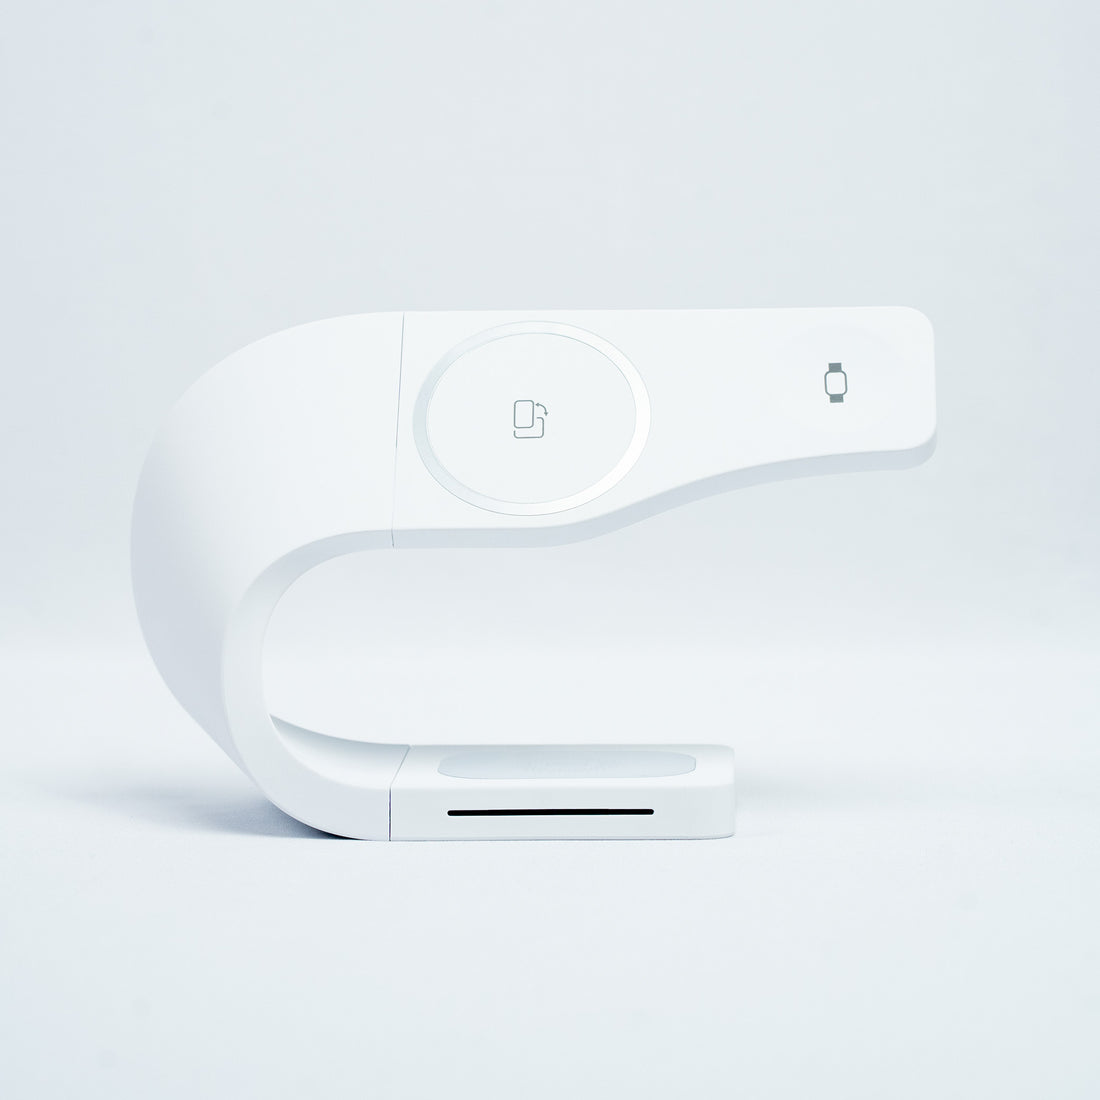 Simpli 3-in-1 Wireless Charging Station in Ivory White - a contemporary MagSafe compatible charging solution for iPhone, Apple Watch, and AirPods featuring a minimalist curved design in a clean white color.